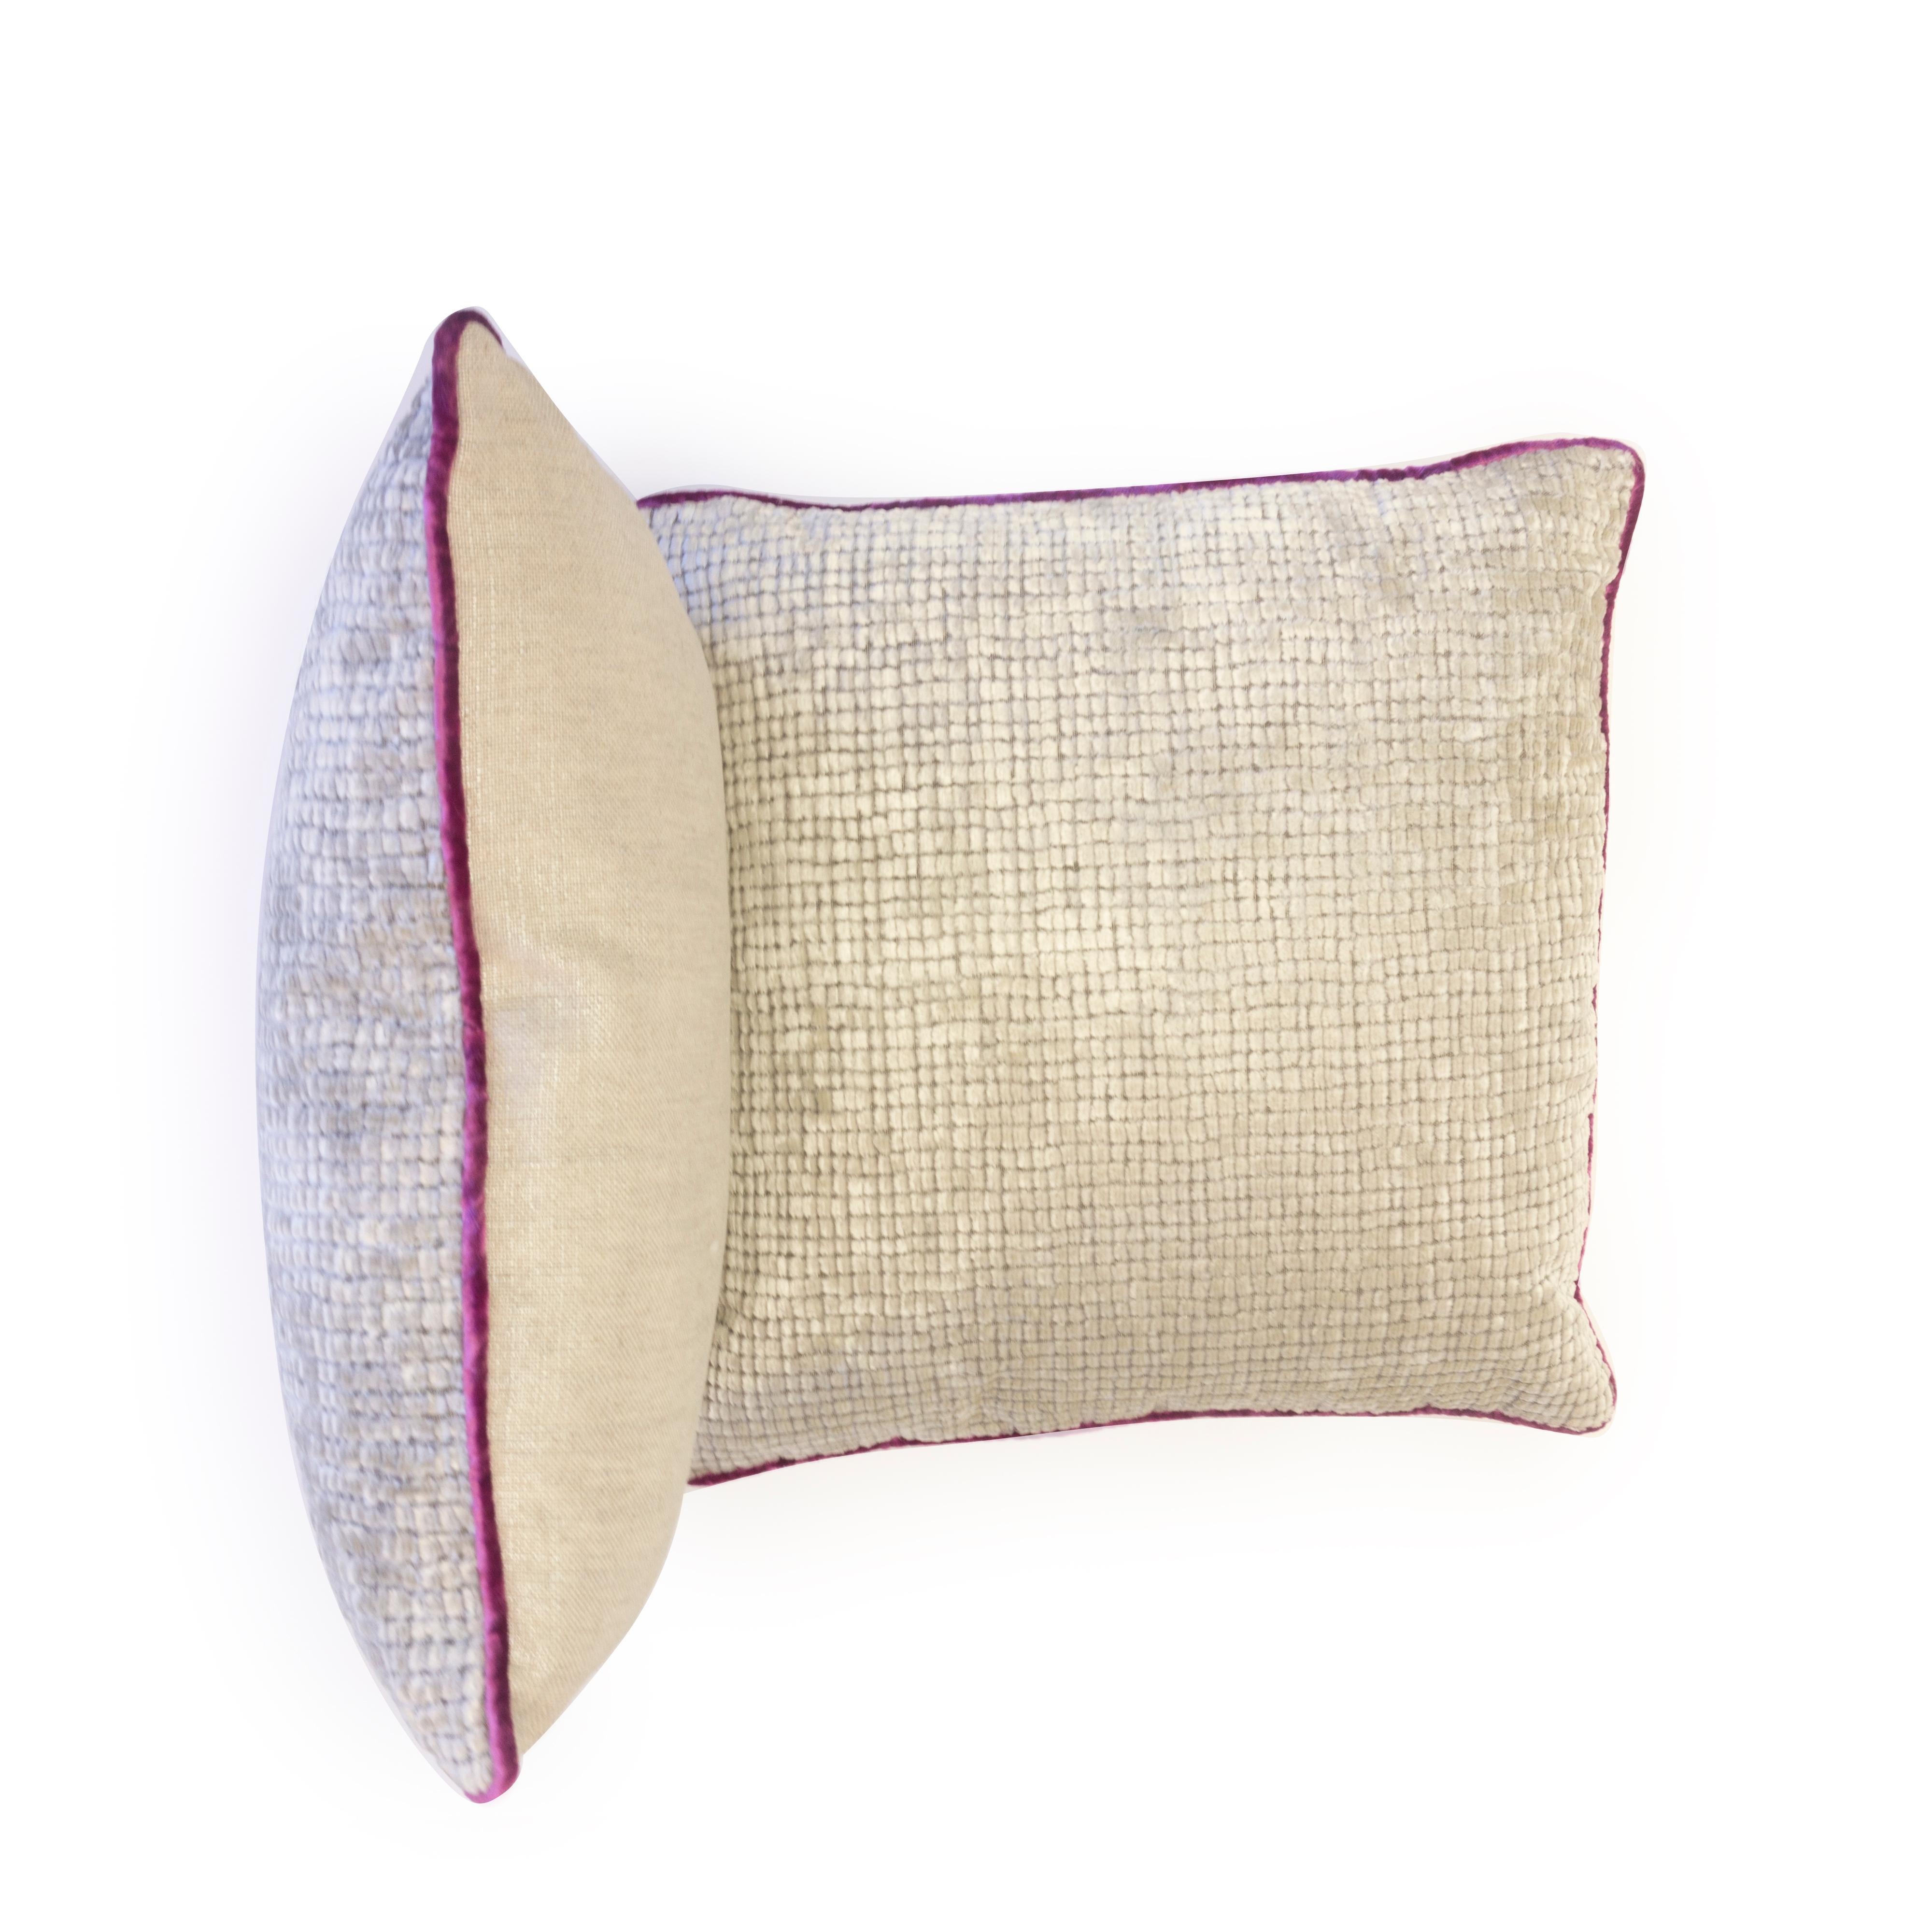 Contemporary Soft Velvet Throw Pillows with Fuchsia Piping